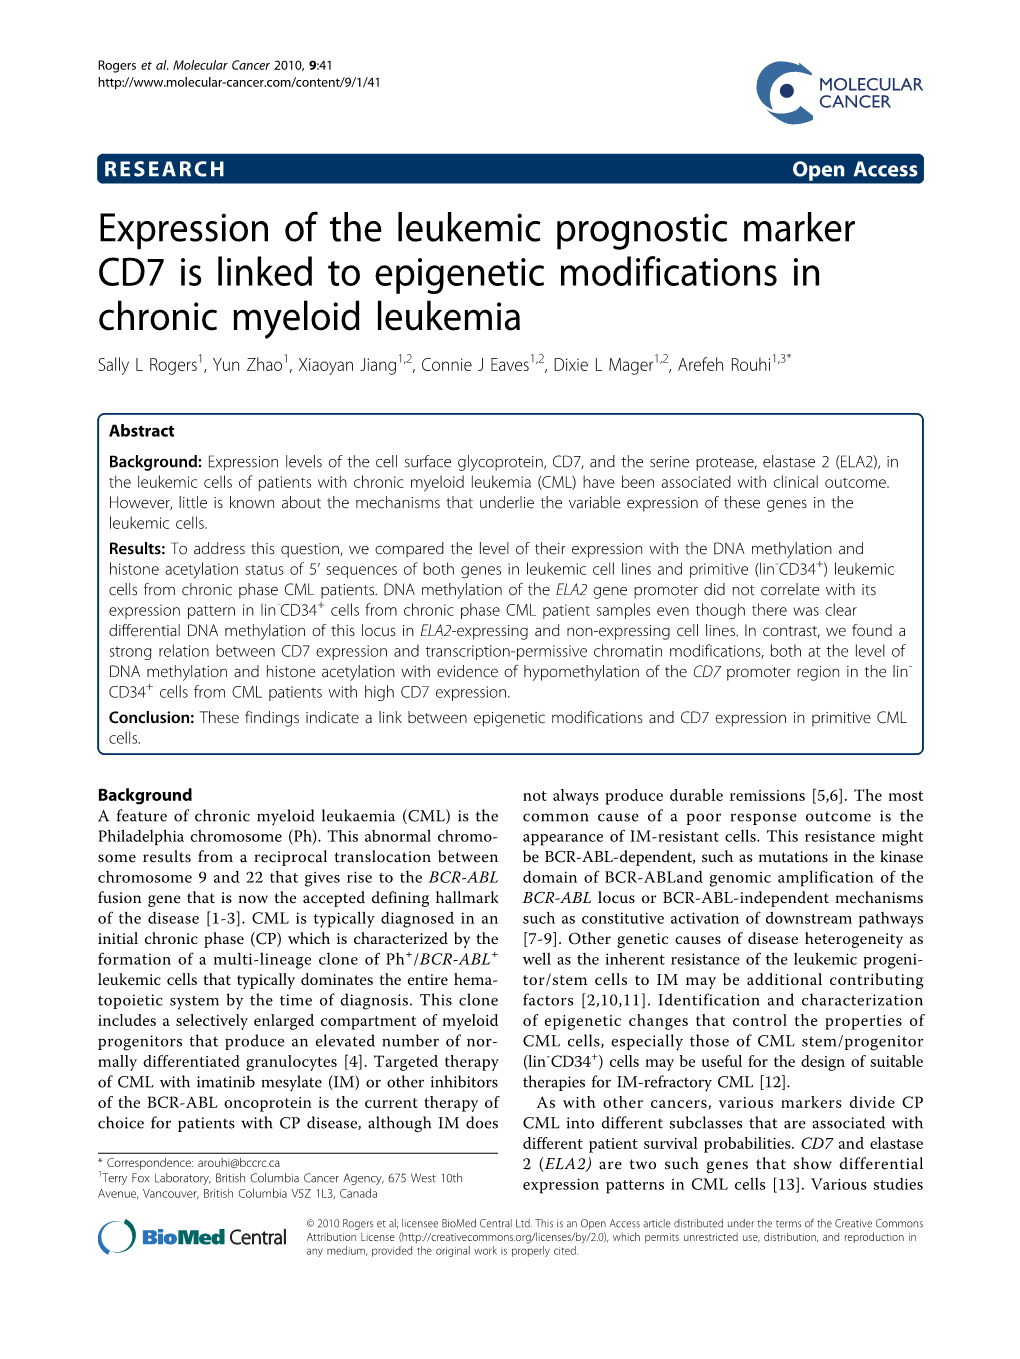 Expression of the Leukemic Prognostic Marker CD7 Is Linked to Epigenetic